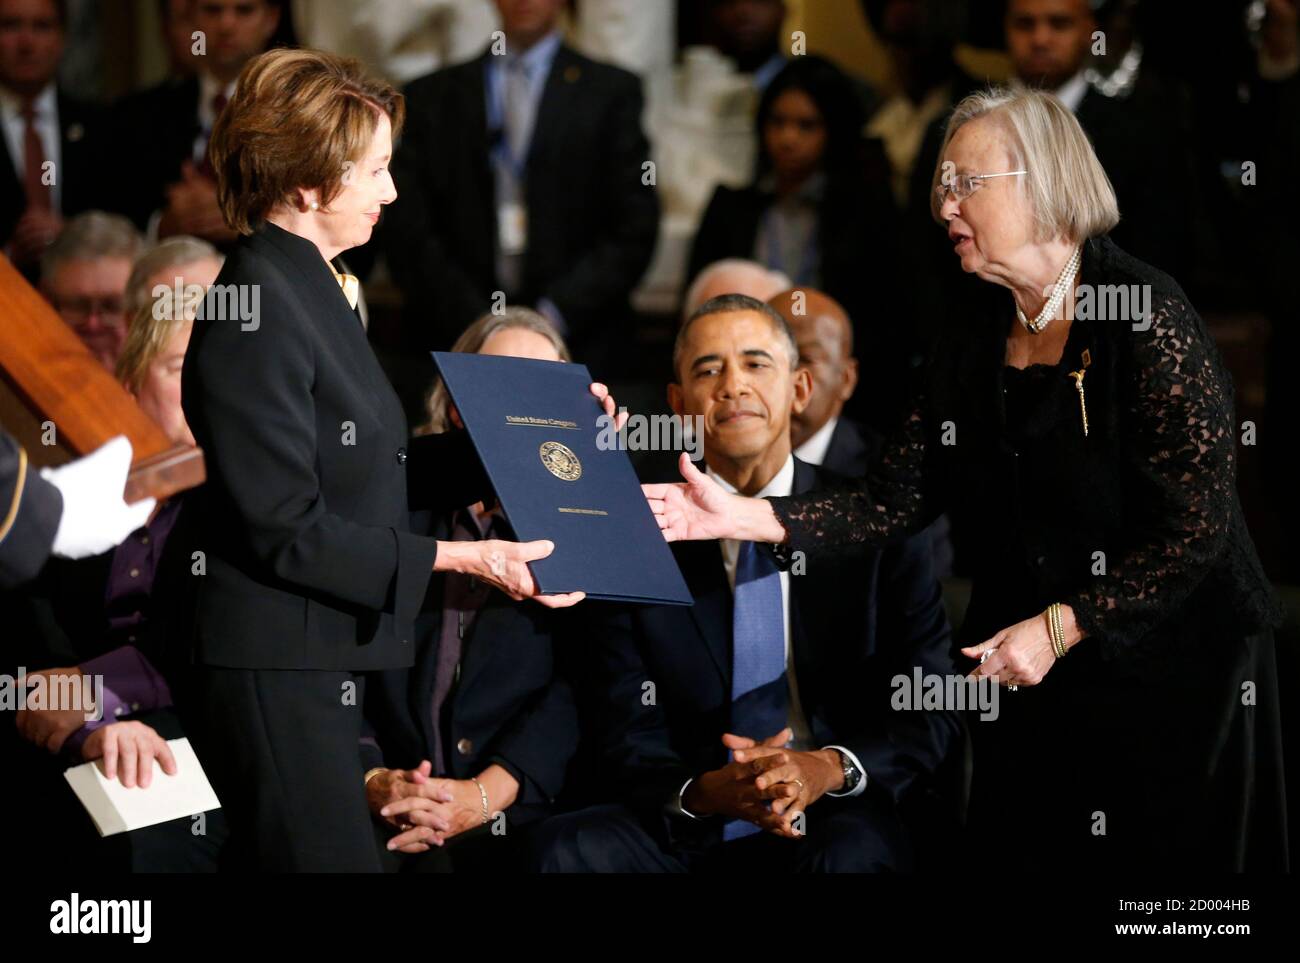 U.S. President Barack Obama (C) watches as former Speaker of the House  Nancy Pelosi (L) hands Heather Foley a resolution during a memorial service  for her husband, former Speaker Tom Foley, in